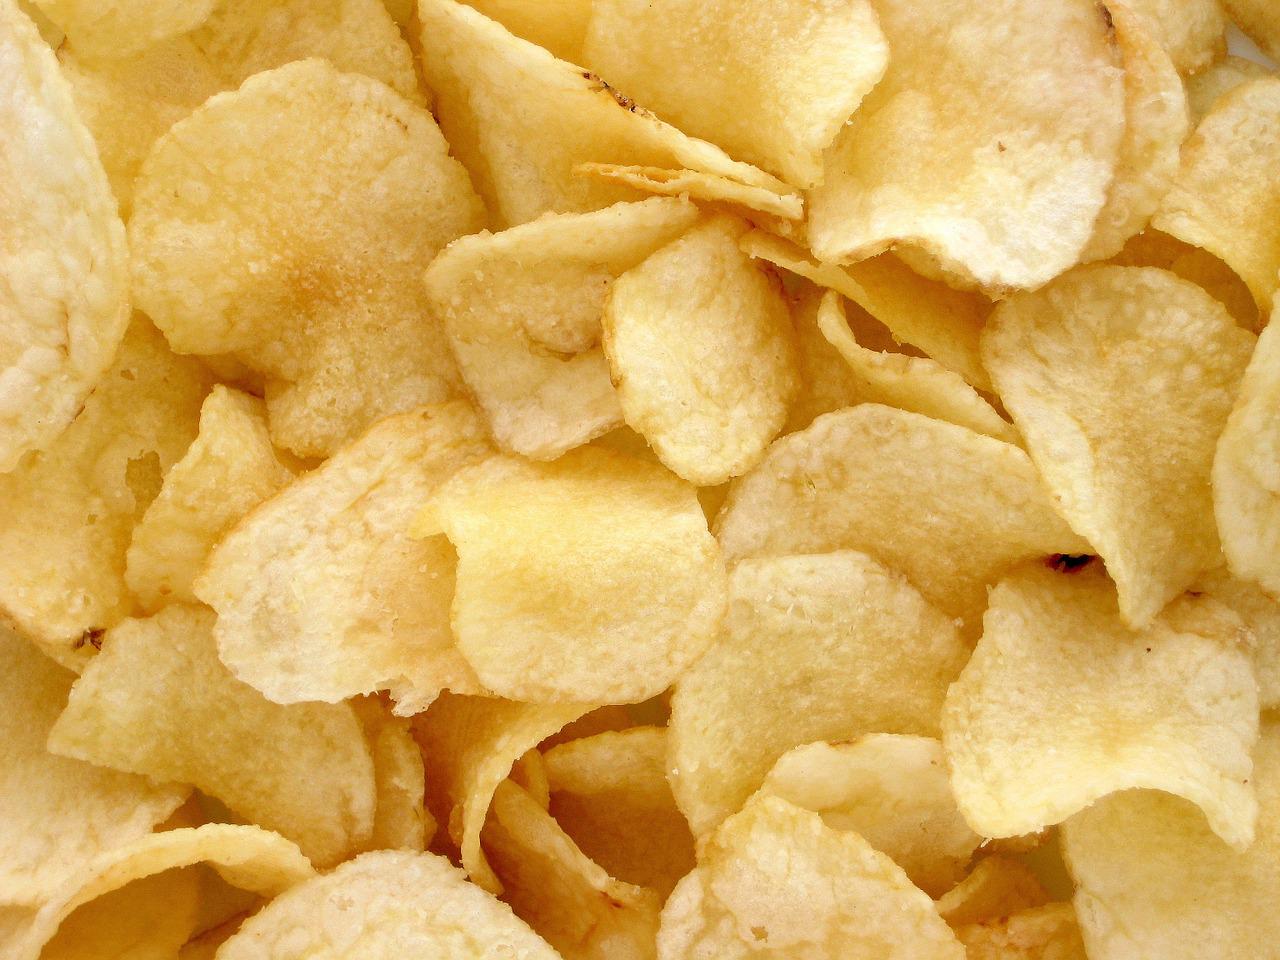 Salted potato chips